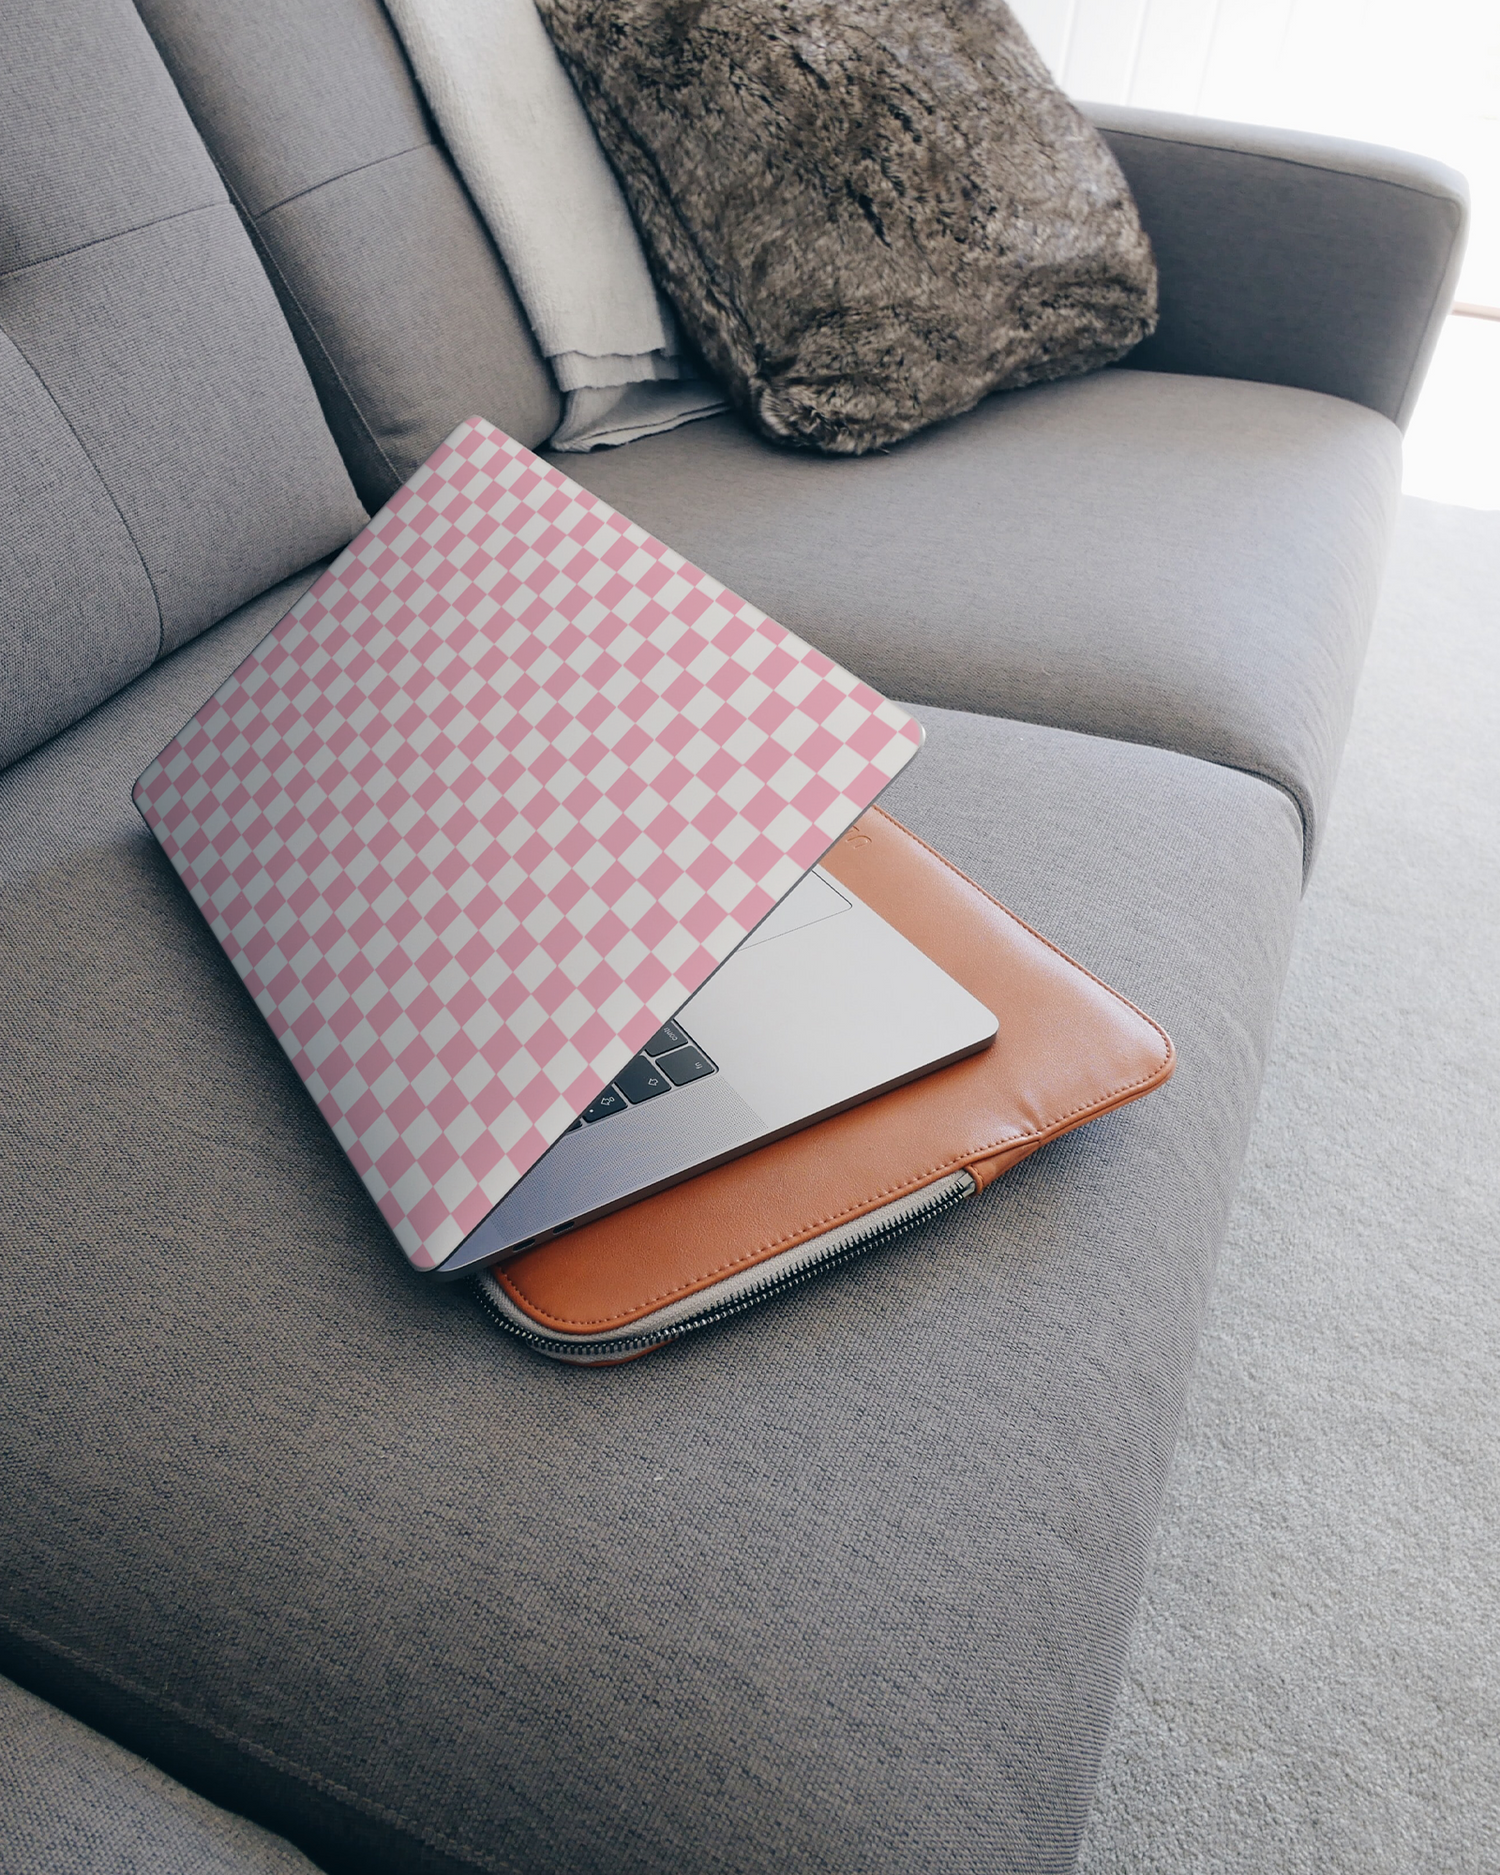 Pink Checkerboard Laptop Skin for 15 inch Apple MacBooks on a couch